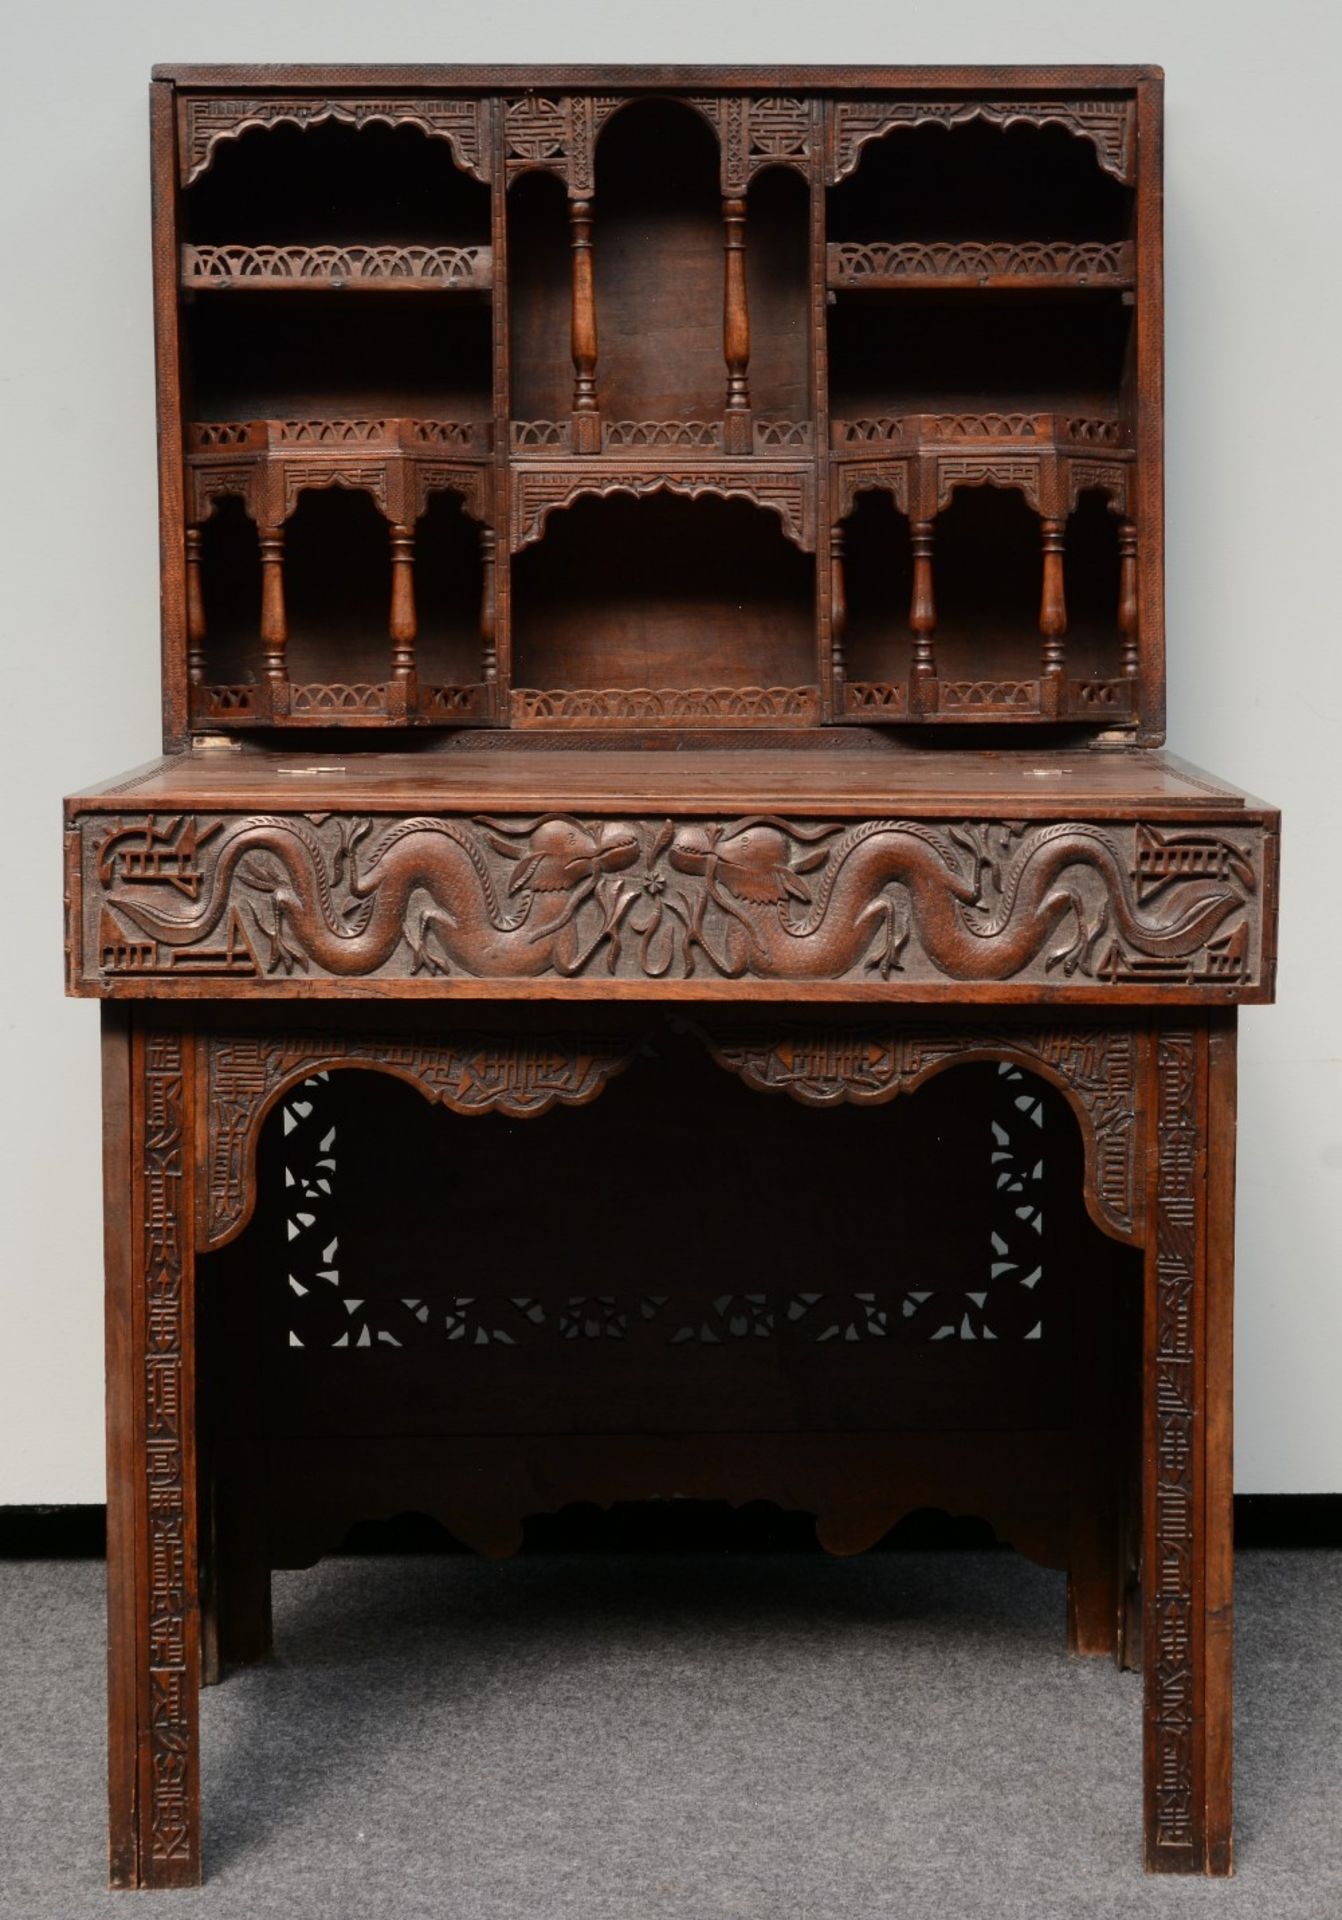 A Chinese carved hardwood travelling desk, relief decorated with dragons and symbols, H 83 - D